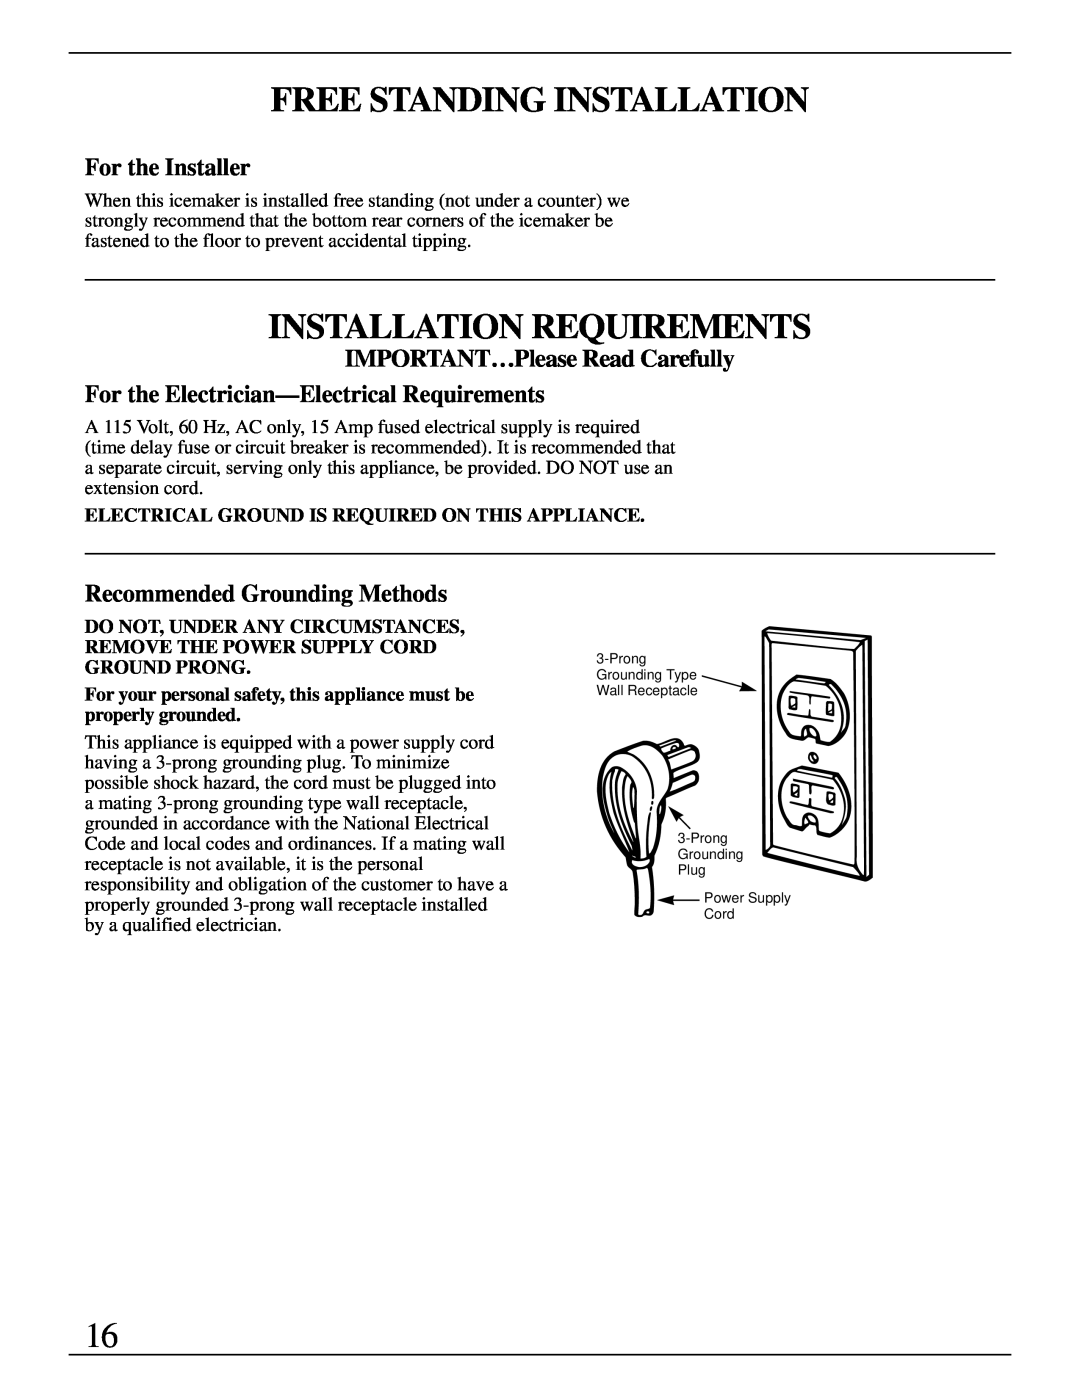 GE Monogram ZDIW50 Free Standing Installation, Installation Requirements, For the Installer, Recommended Grounding Methods 